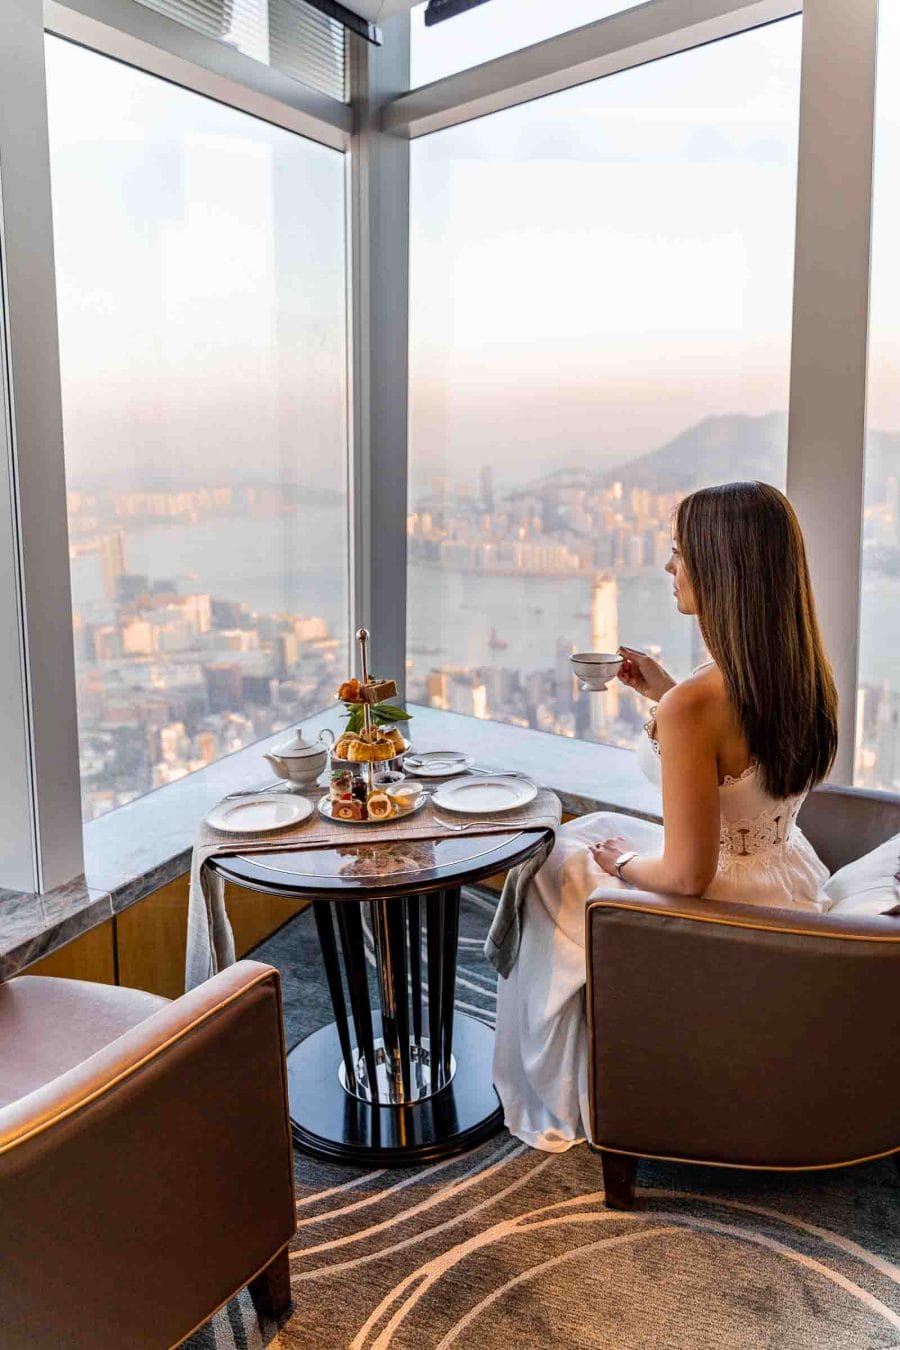 Girl in white dress drinking tea in front of a window with the view of the Hong Kong skyline